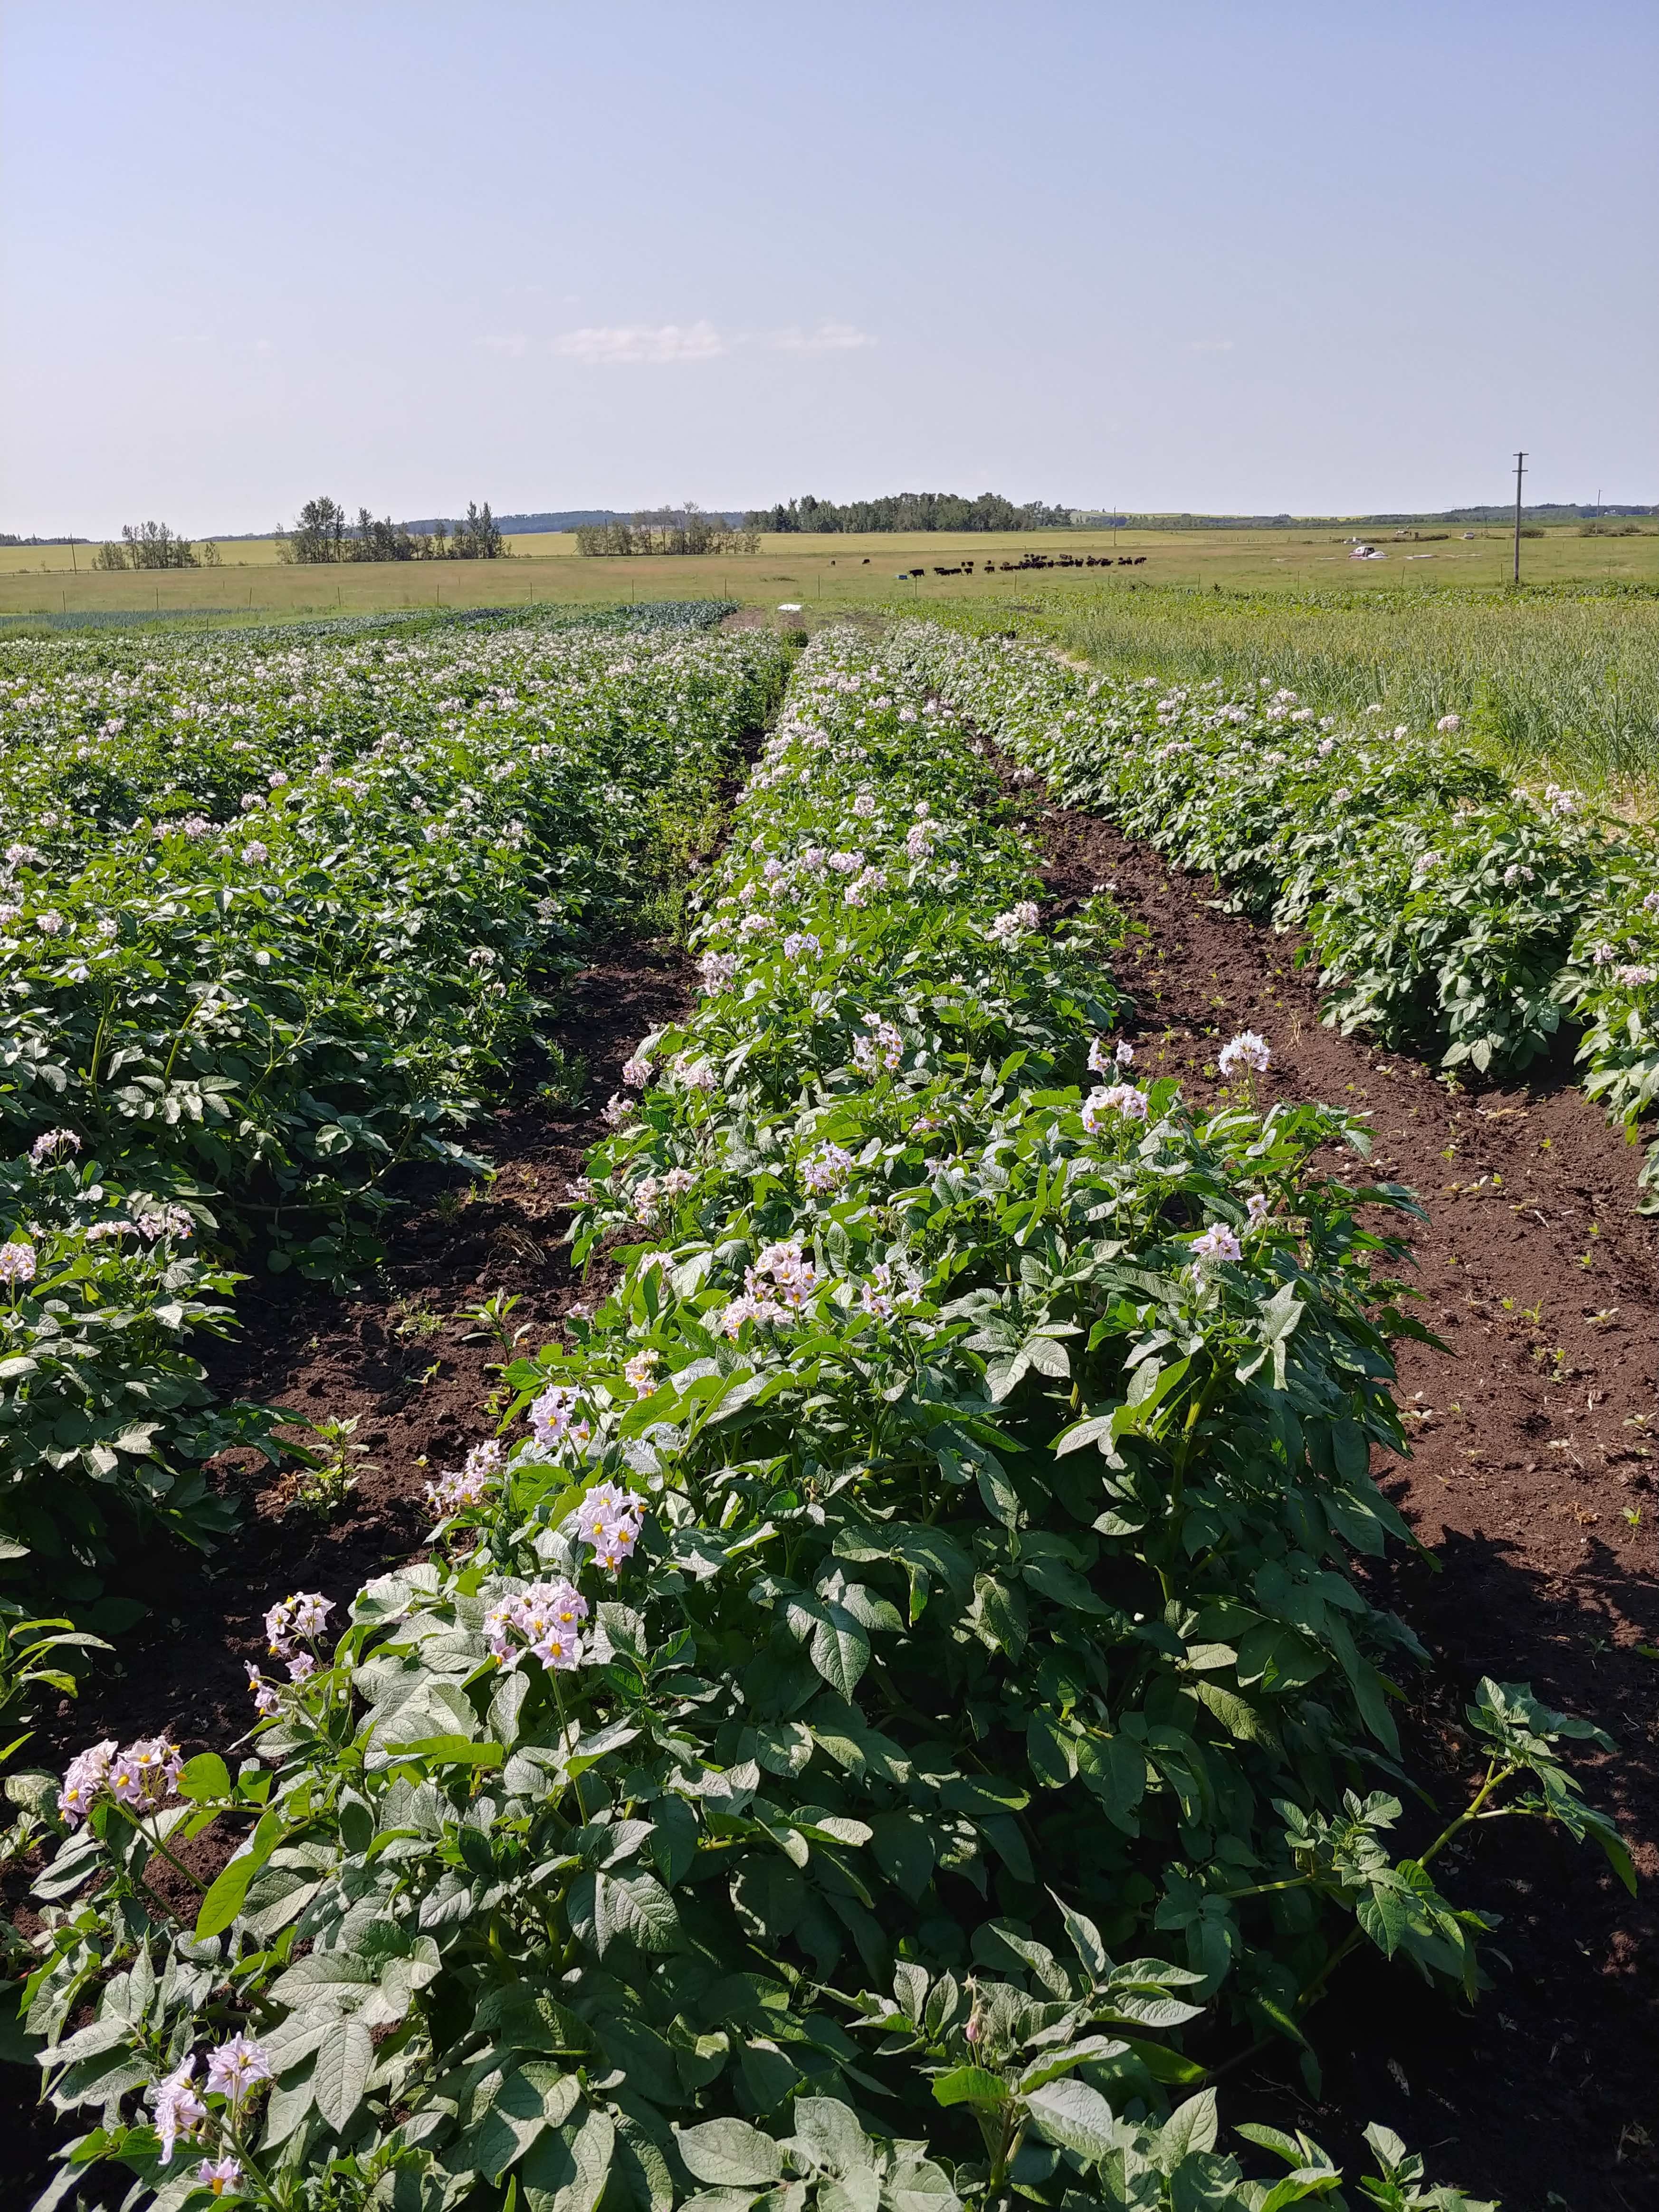 August 5th - Farm Happenings - Potatoes and Beef